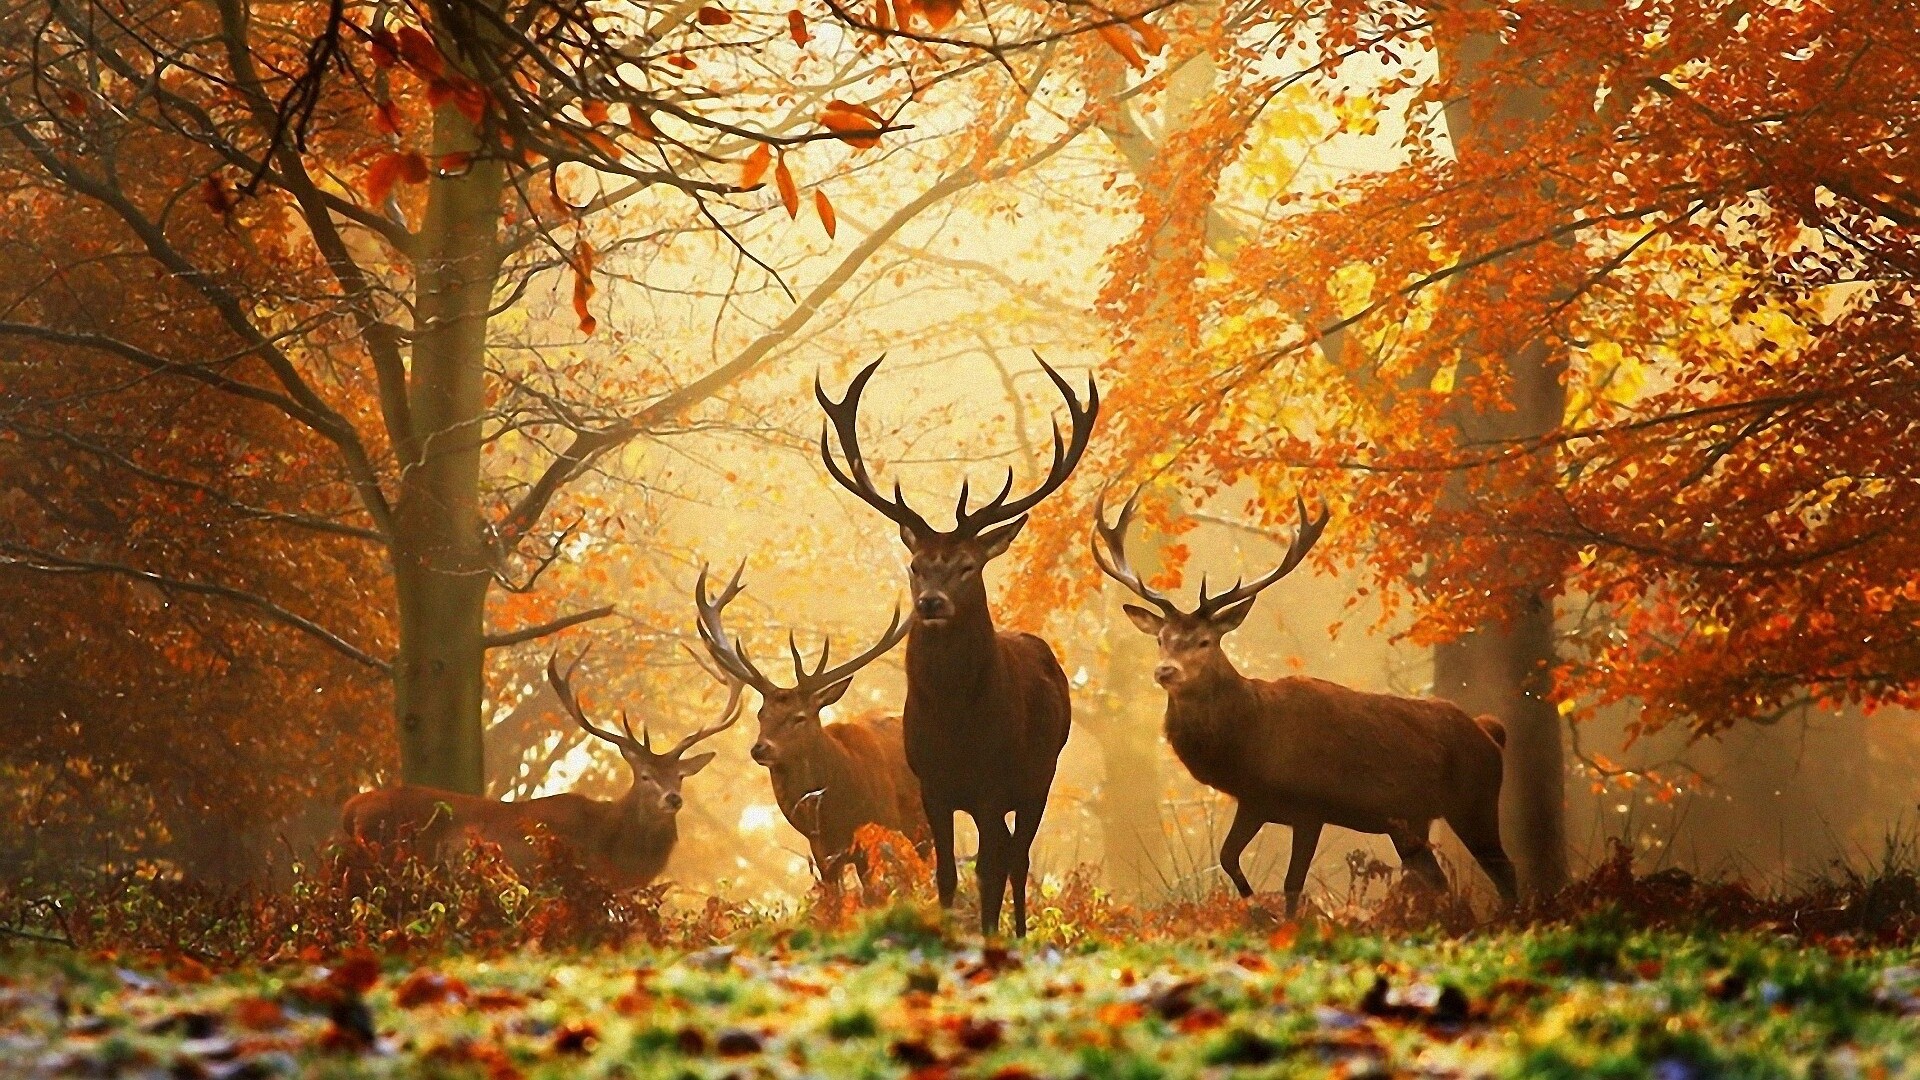 Autumn: The transition from summer to winter, Fall in the forest. 1920x1080 Full HD Background.